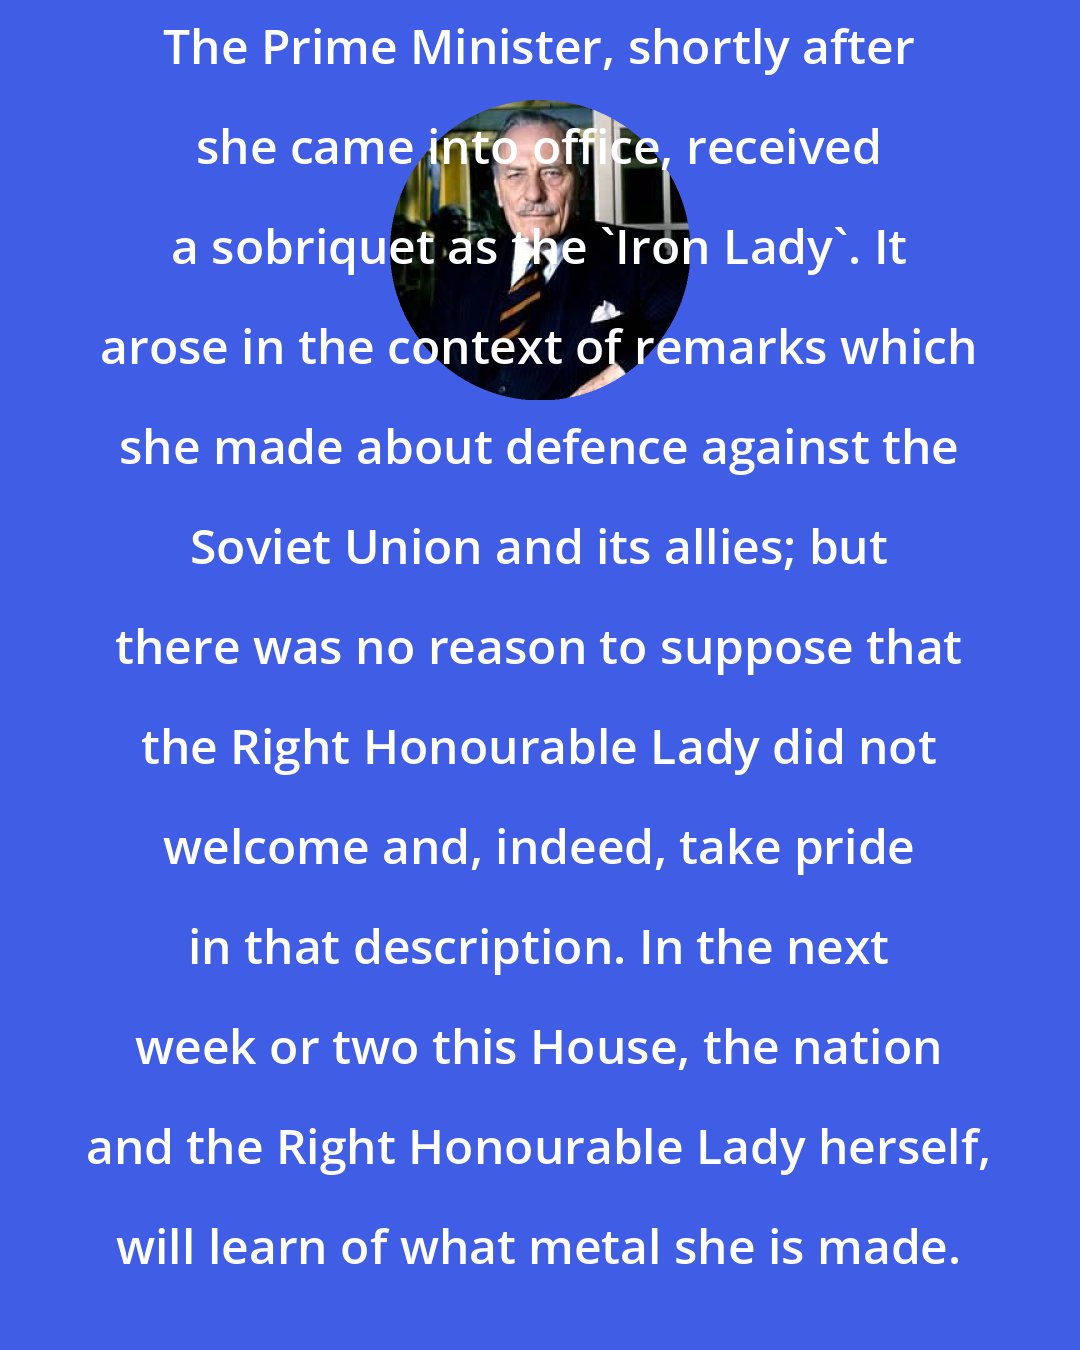 Enoch Powell: The Prime Minister, shortly after she came into office, received a sobriquet as the 'Iron Lady'. It arose in the context of remarks which she made about defence against the Soviet Union and its allies; but there was no reason to suppose that the Right Honourable Lady did not welcome and, indeed, take pride in that description. In the next week or two this House, the nation and the Right Honourable Lady herself, will learn of what metal she is made.